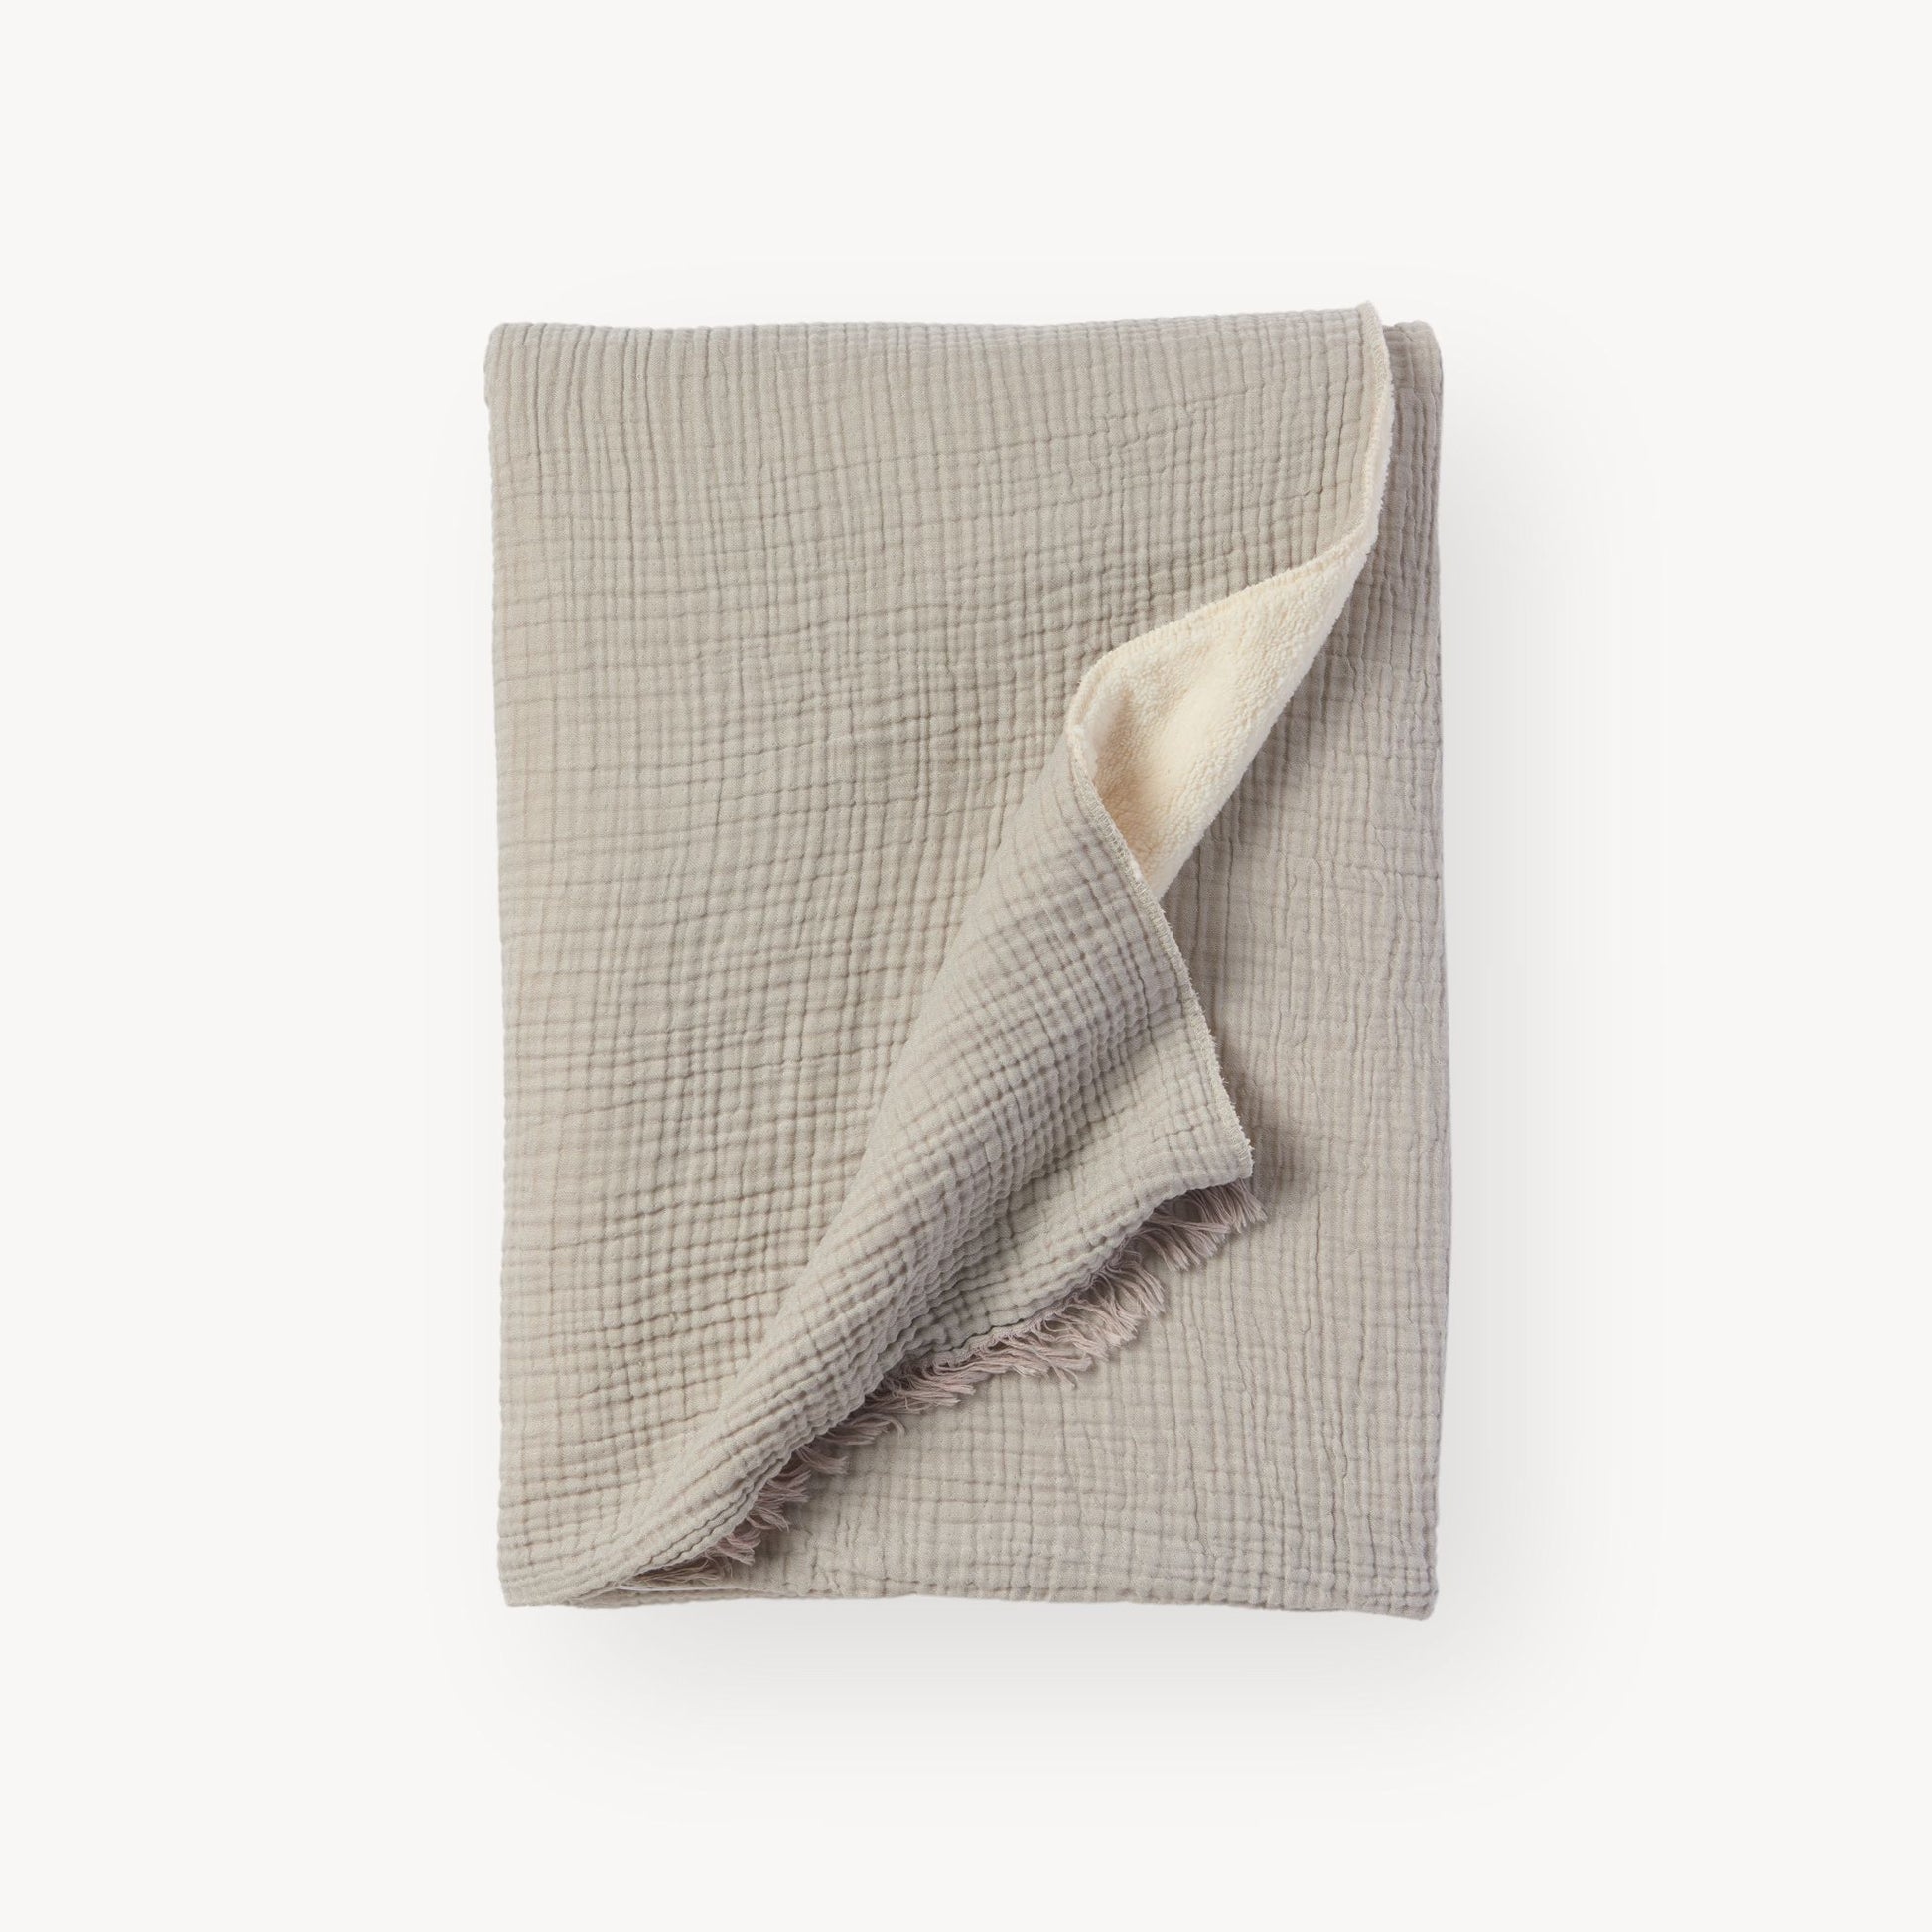 Light grey crinkle muslin plus fleece blanket. Made with 100% Turkish cotton blanket with 100% high-quality polyester fleece